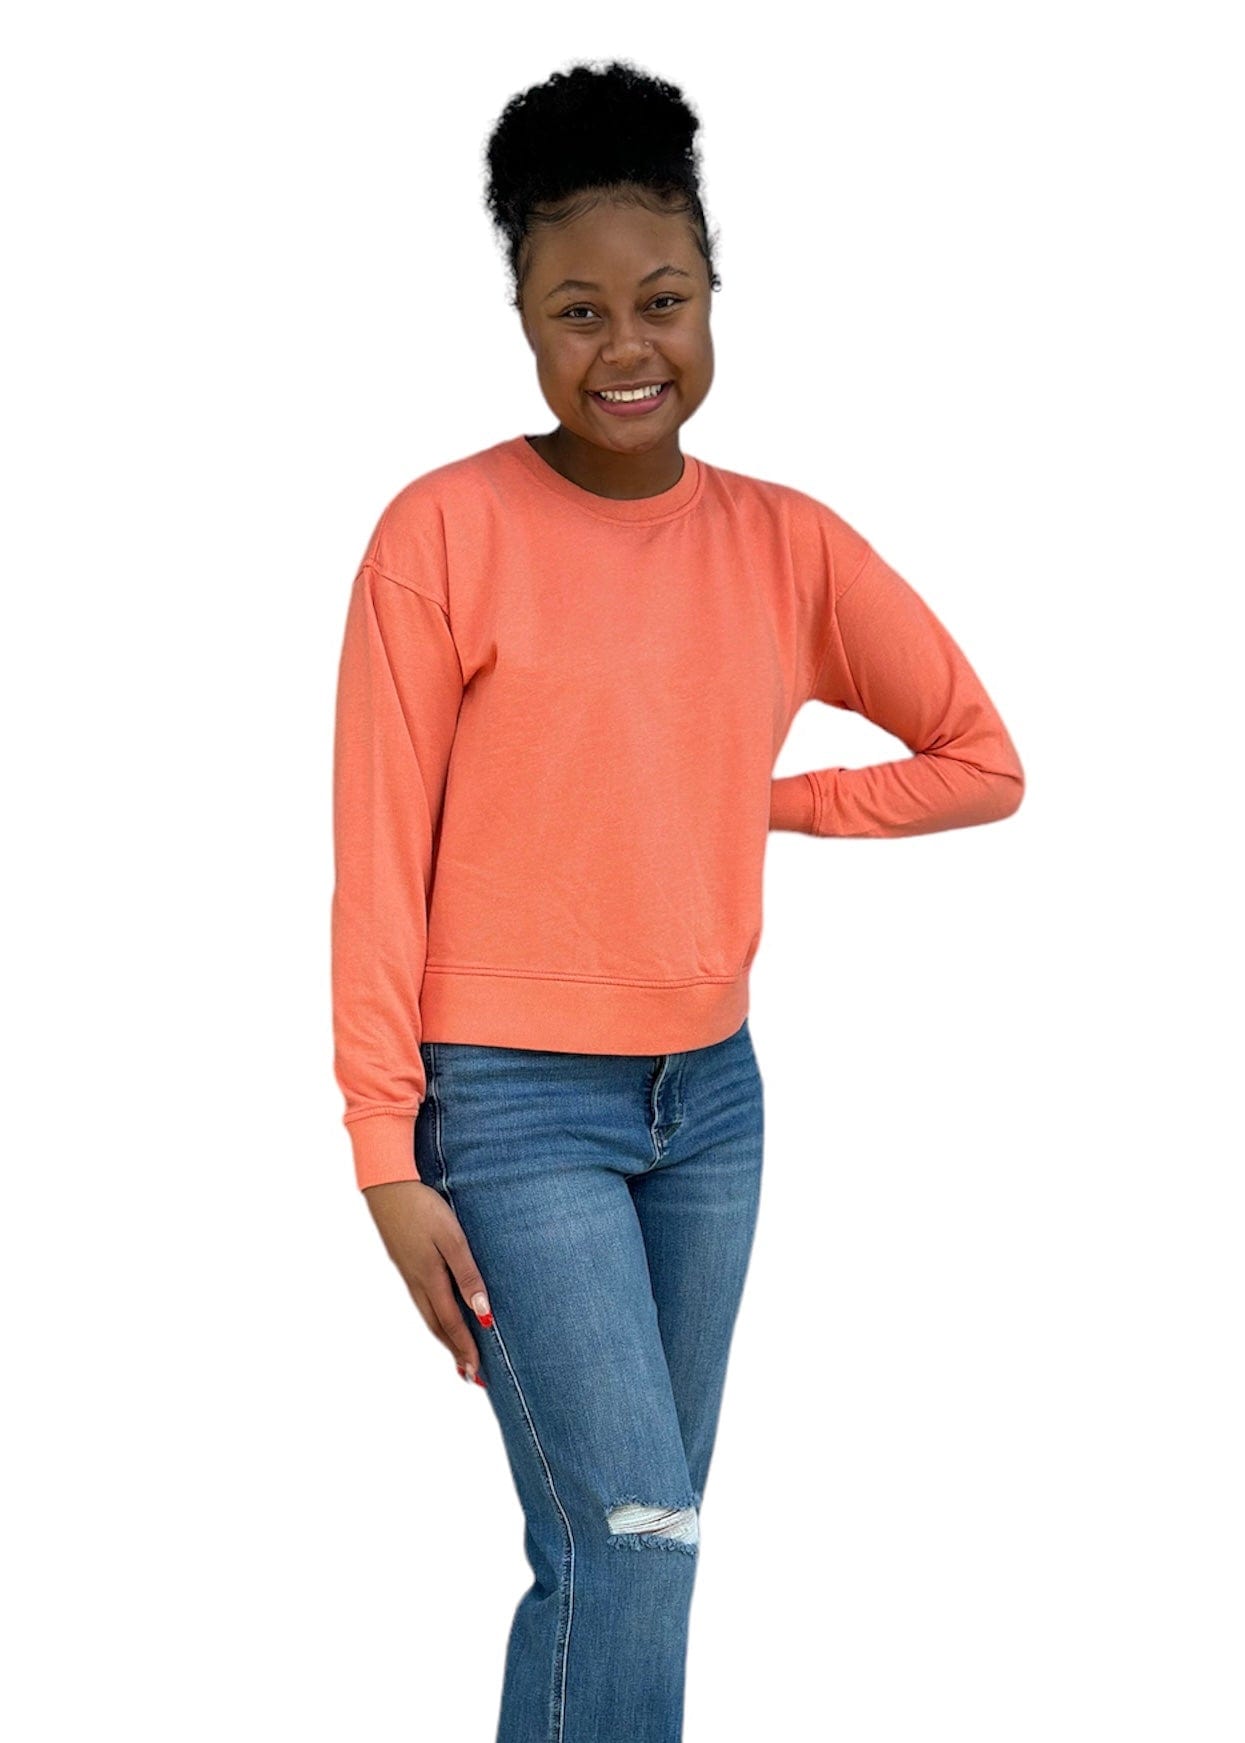 Islander LS in Salmon | SoFriCo Southern Fried Cotton Shirt